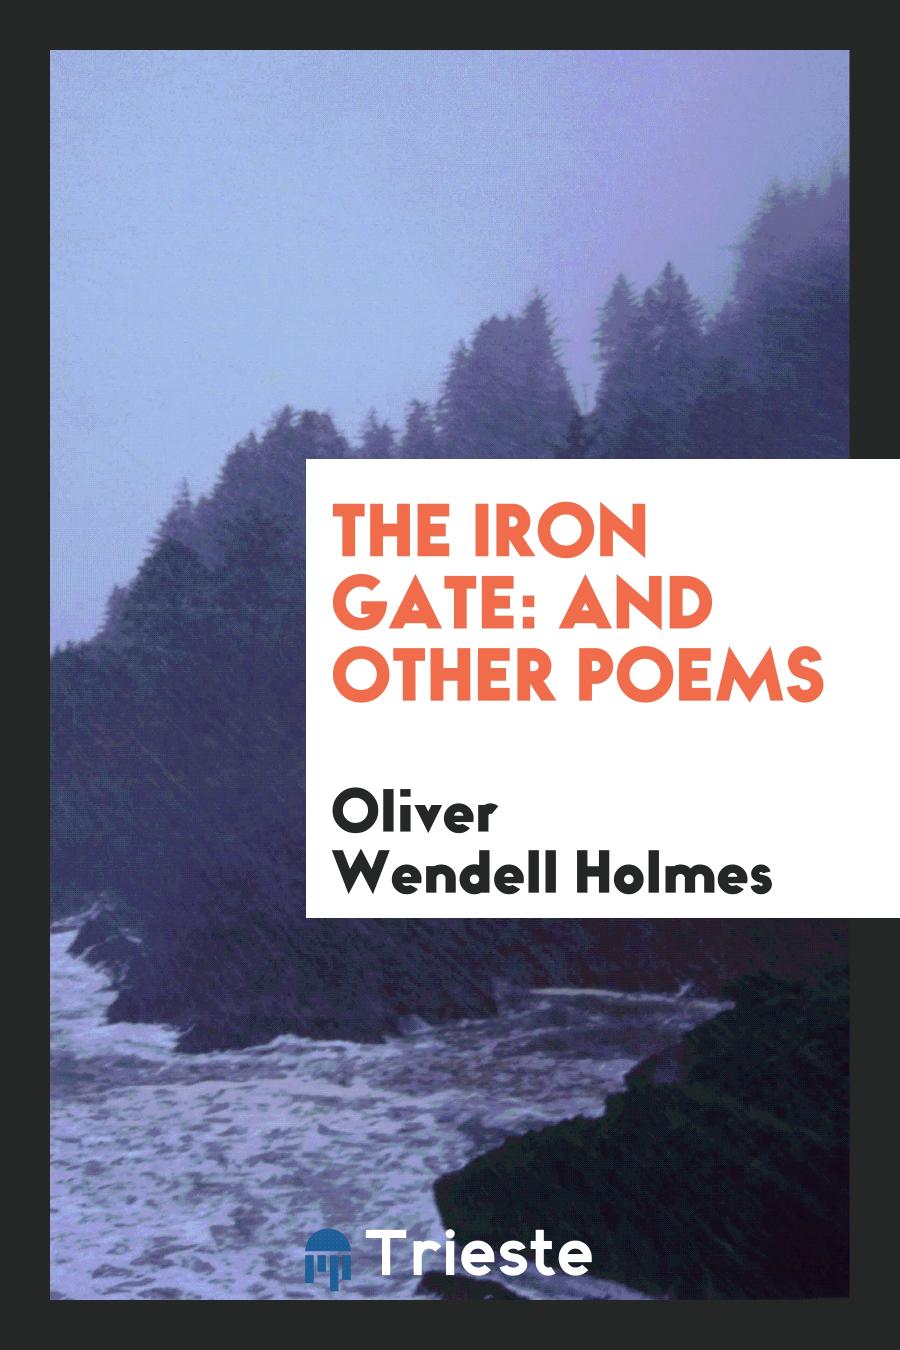 The Iron Gate: And Other Poems